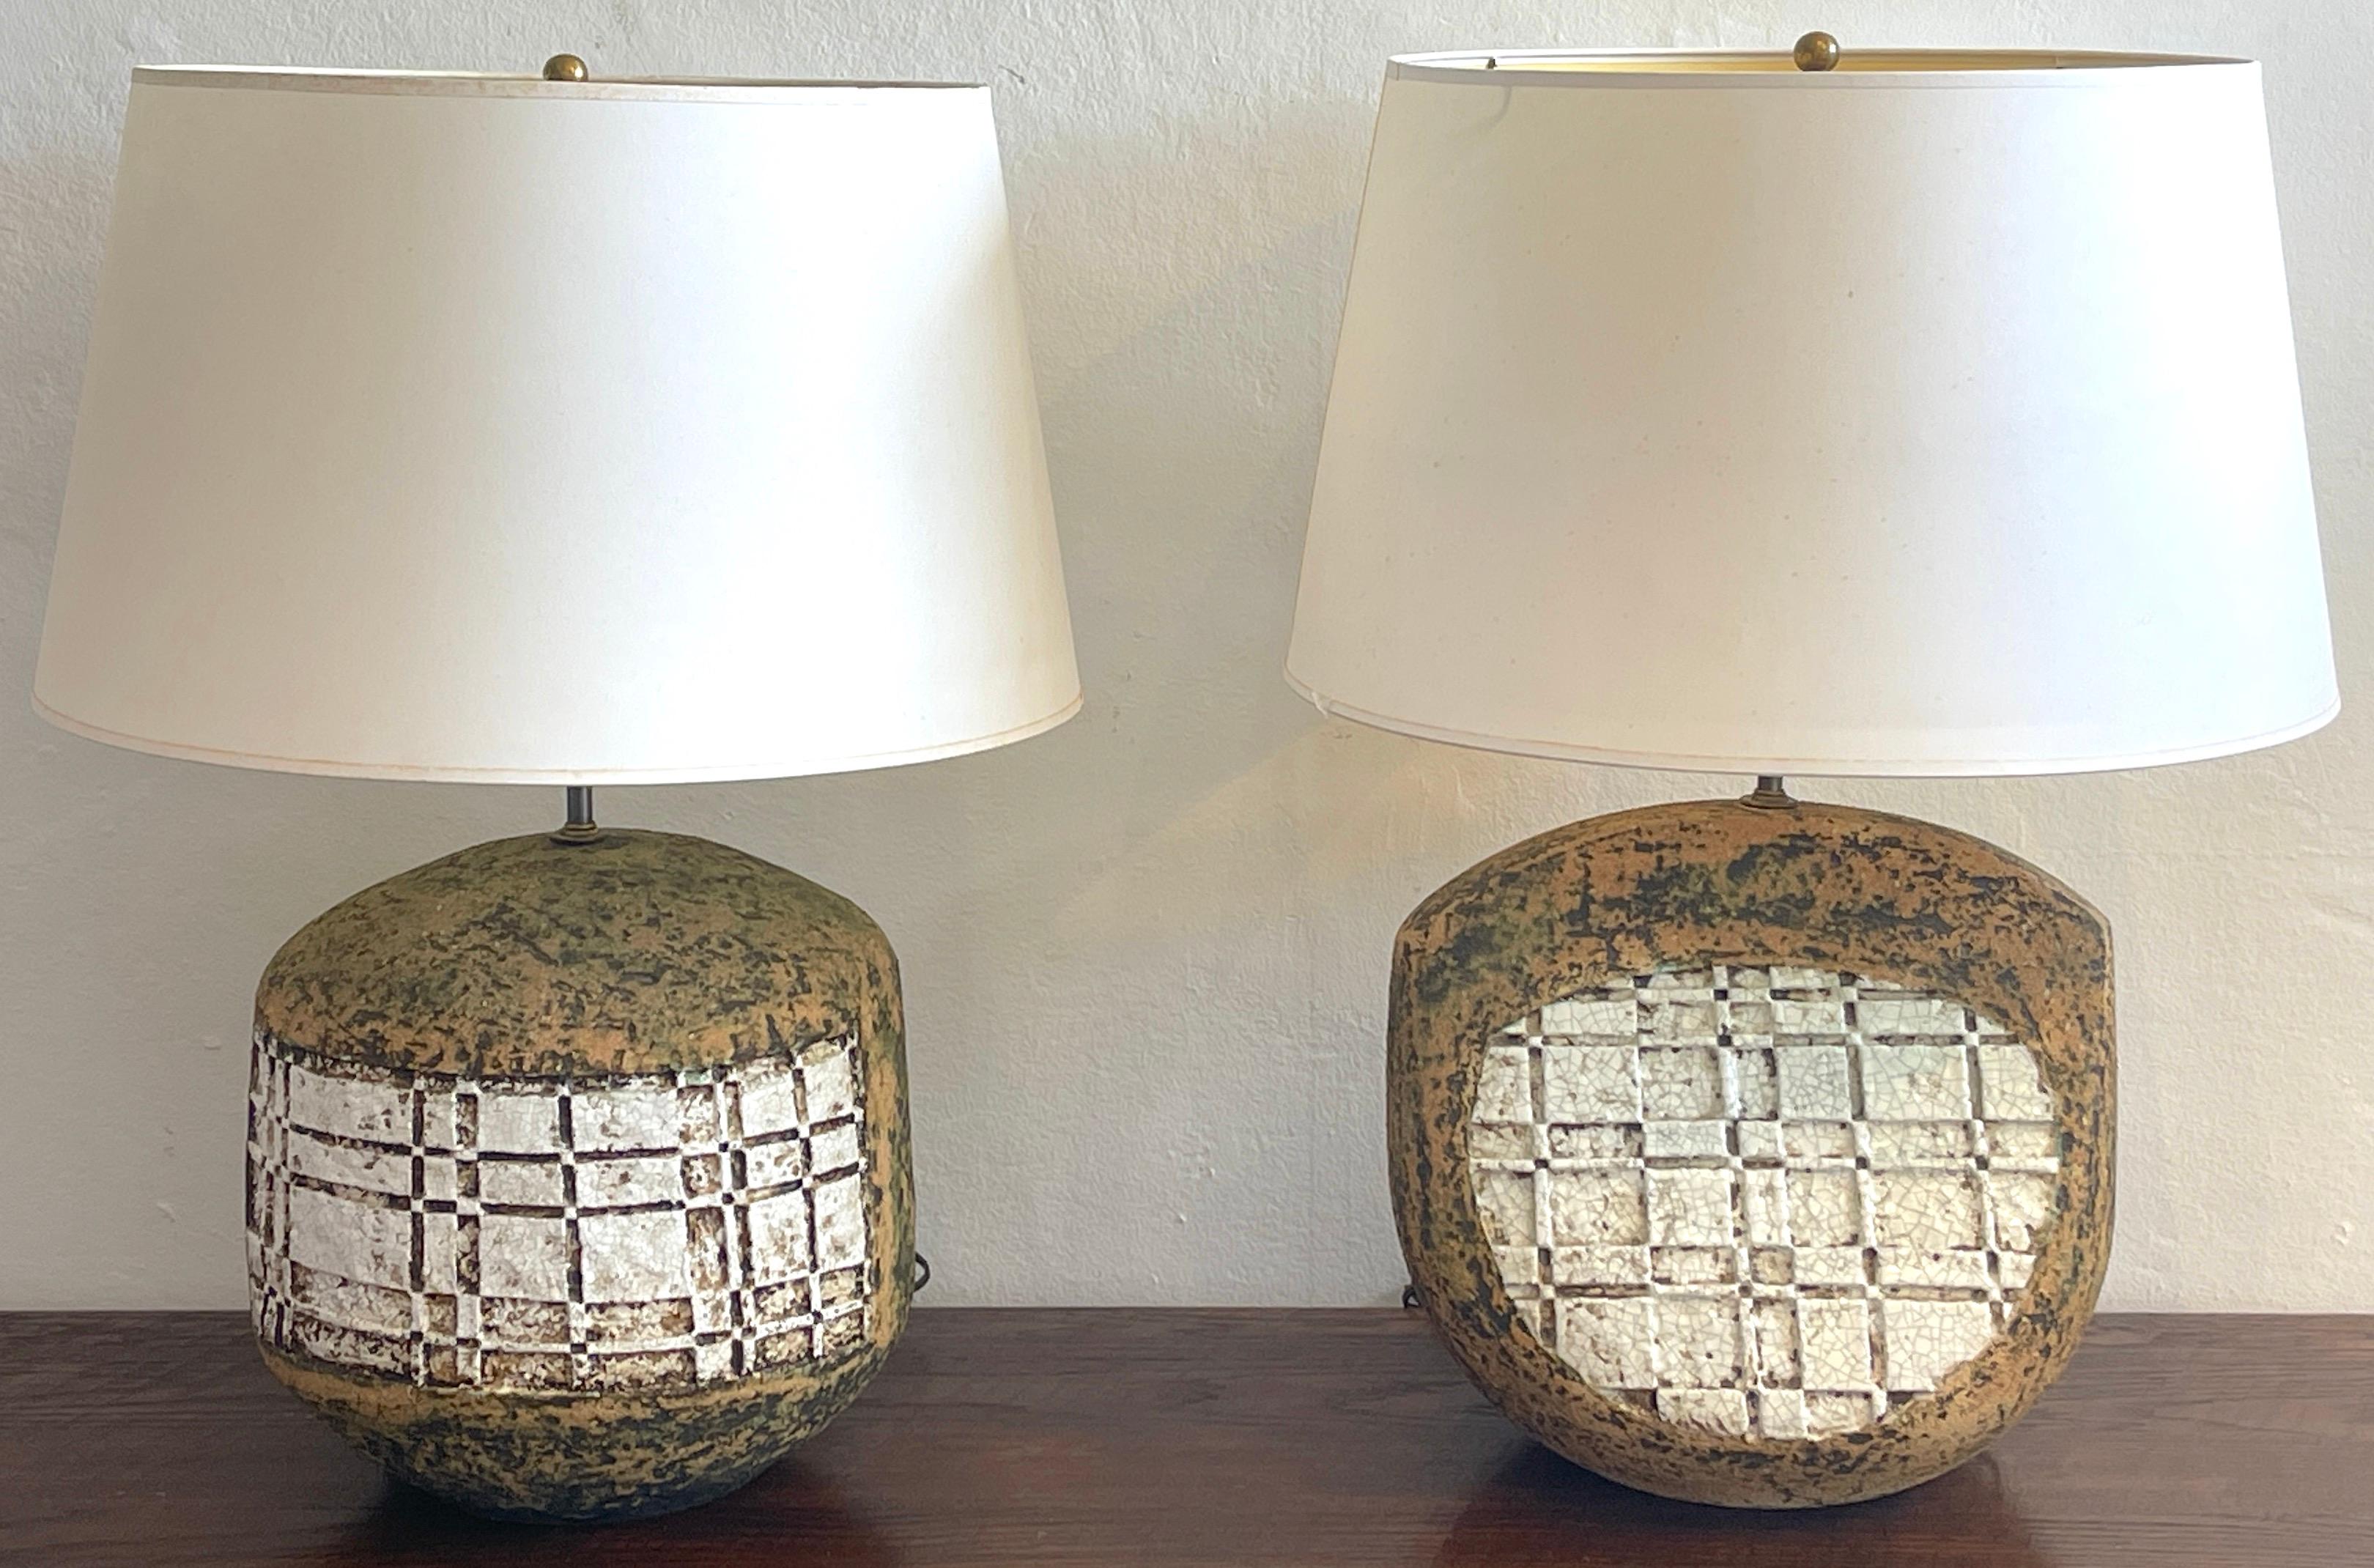 A companion pair Italian Mid-Century Modern pottery geometric lamps, one of circular and one a right triangular form, each one decorated with incised white glazed grid pattern on naturalistic background.
Shown with display 12